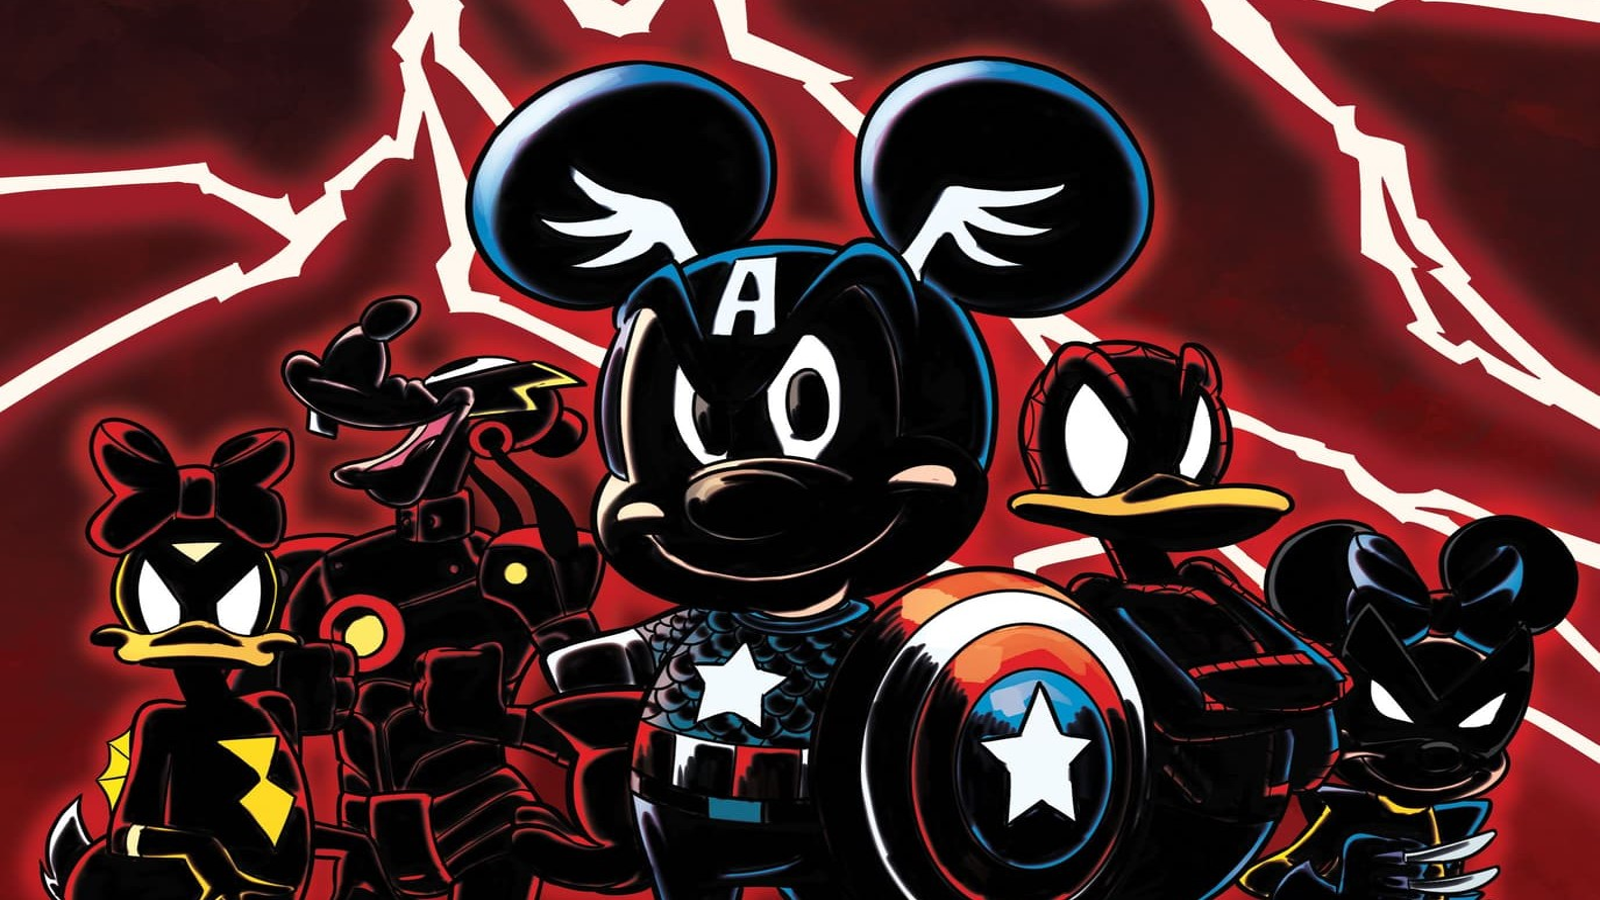 Marvel/Disney Accused Of Ripping Off Born From Pain Art Design For